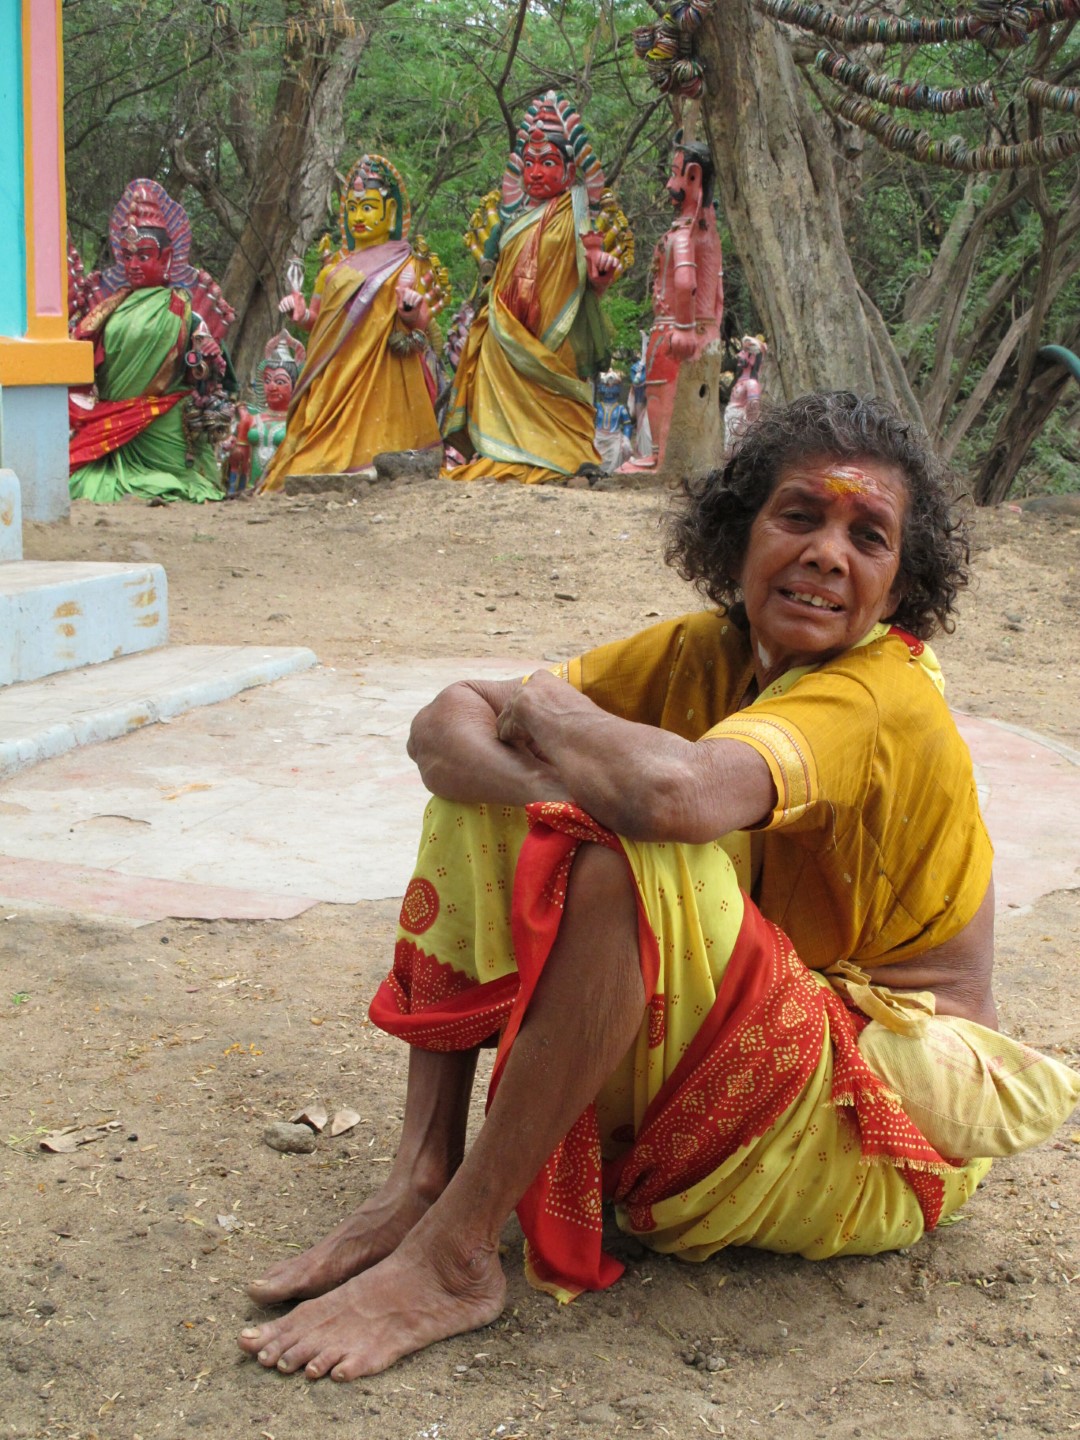 <span style="font-weight:normal;">A devotee sits outside a small Muthurakash shrine where women are not permitted to enter. The grounds surrounding the enclosed shrine are crowded with effigies of the Tamil goddess Kaliyamman who has been lavished with bangles and silk saris.</span>